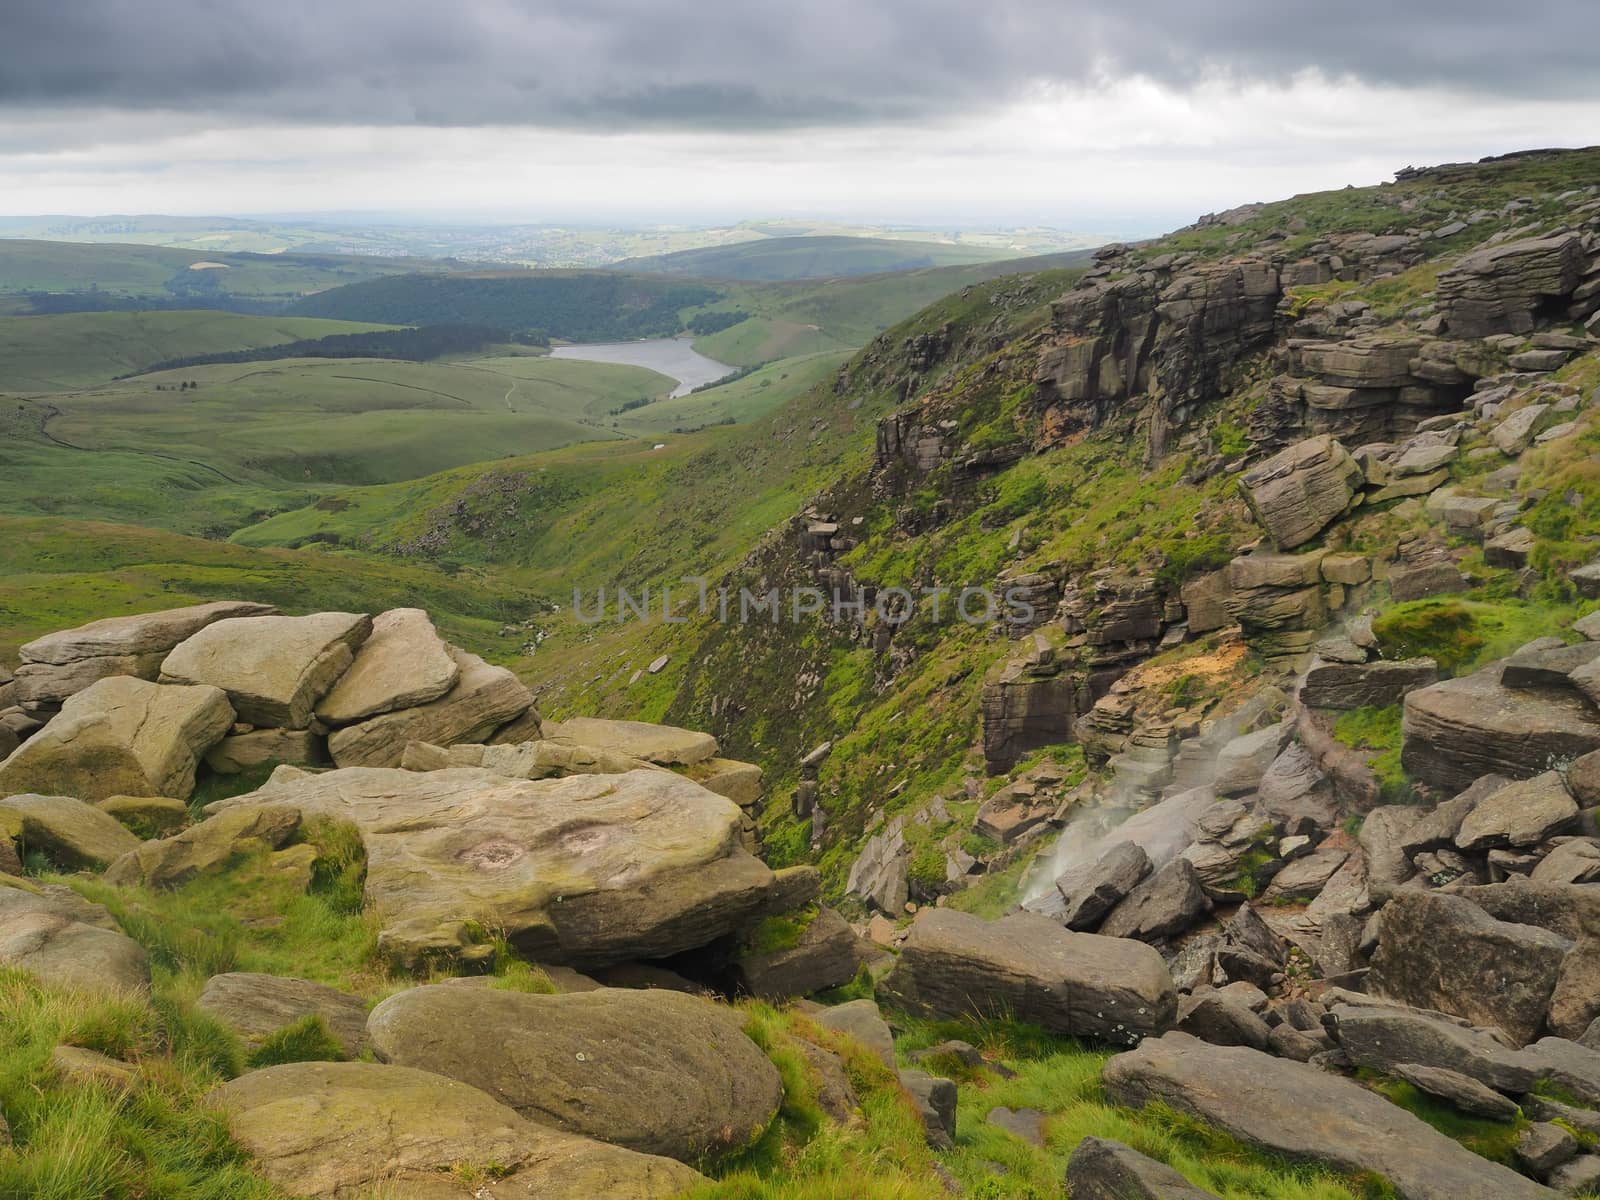 Kinder Downfall overlooking Kinder Reservoir with the wind blowing the waterfall back into the air against dark storm clouds overhead, Peak District National Park, UK